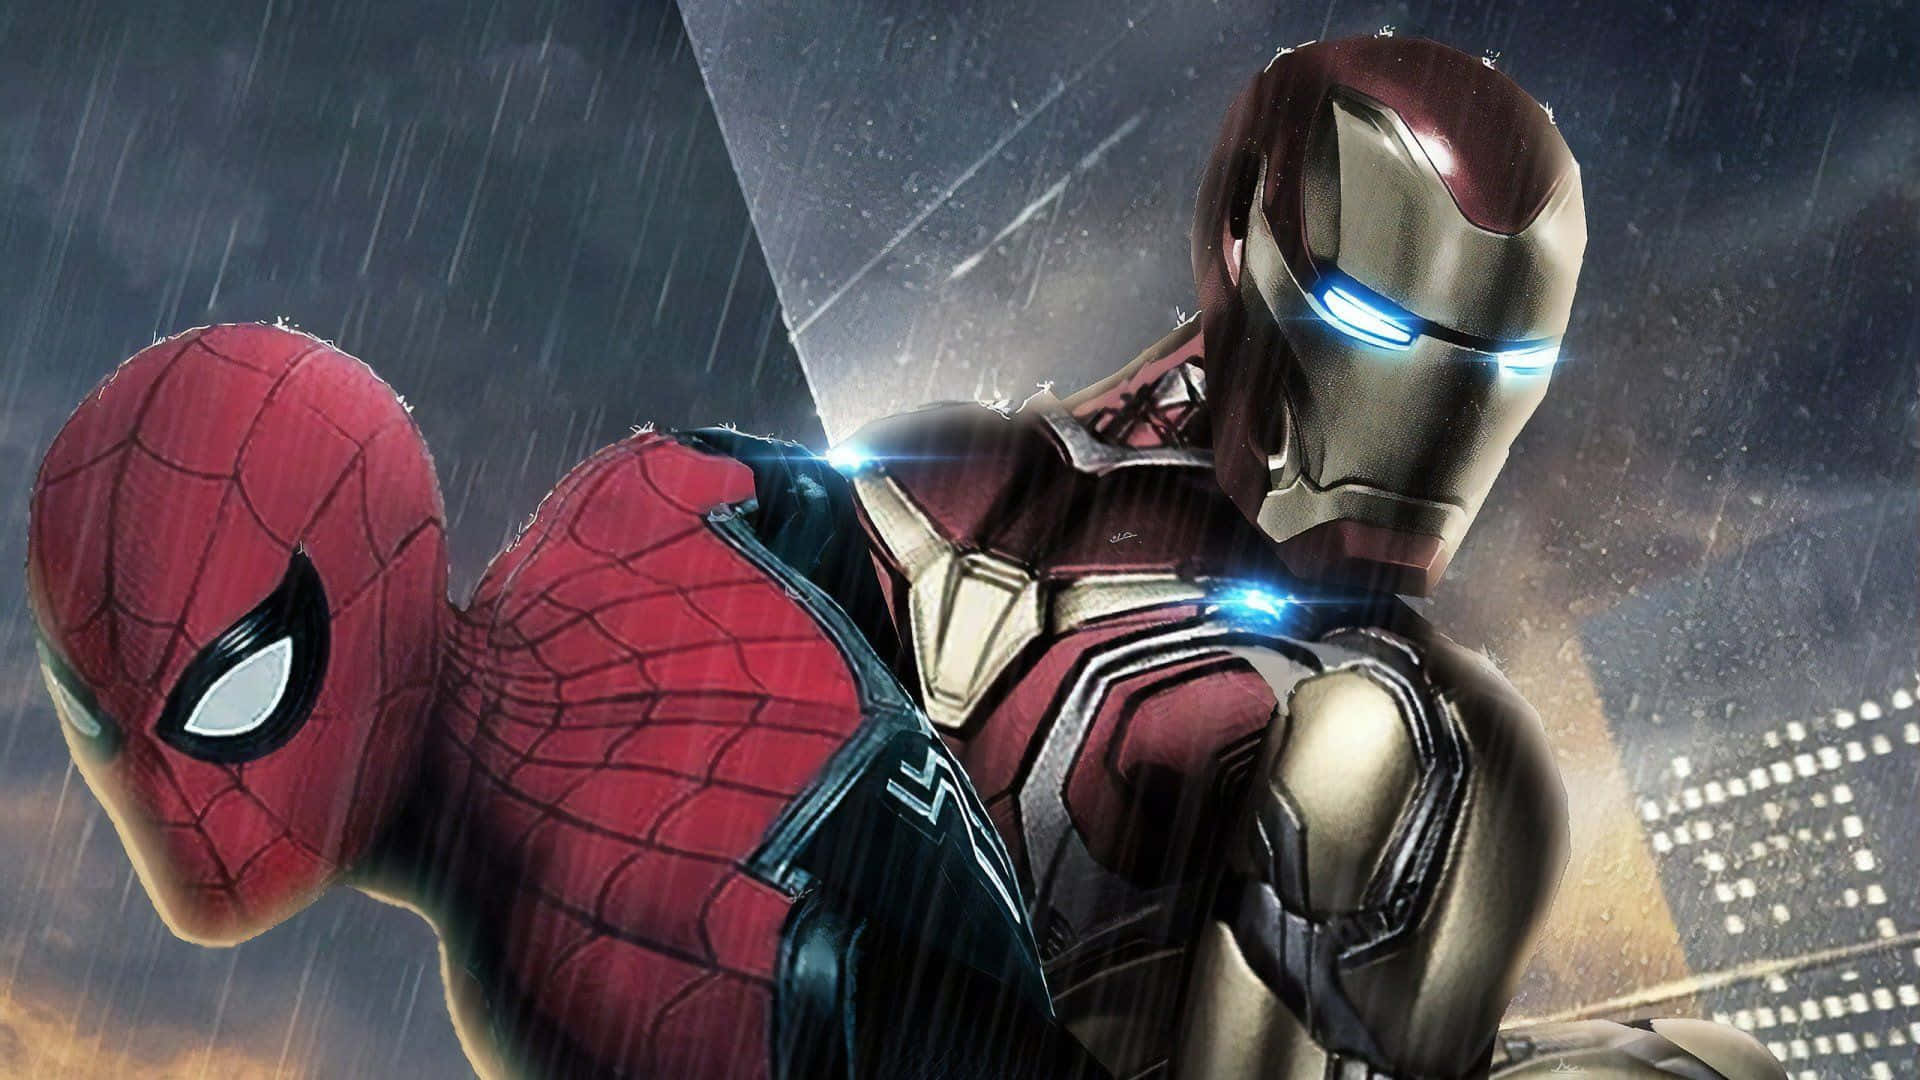 Iron Man and Spider-Man united in battle! Wallpaper